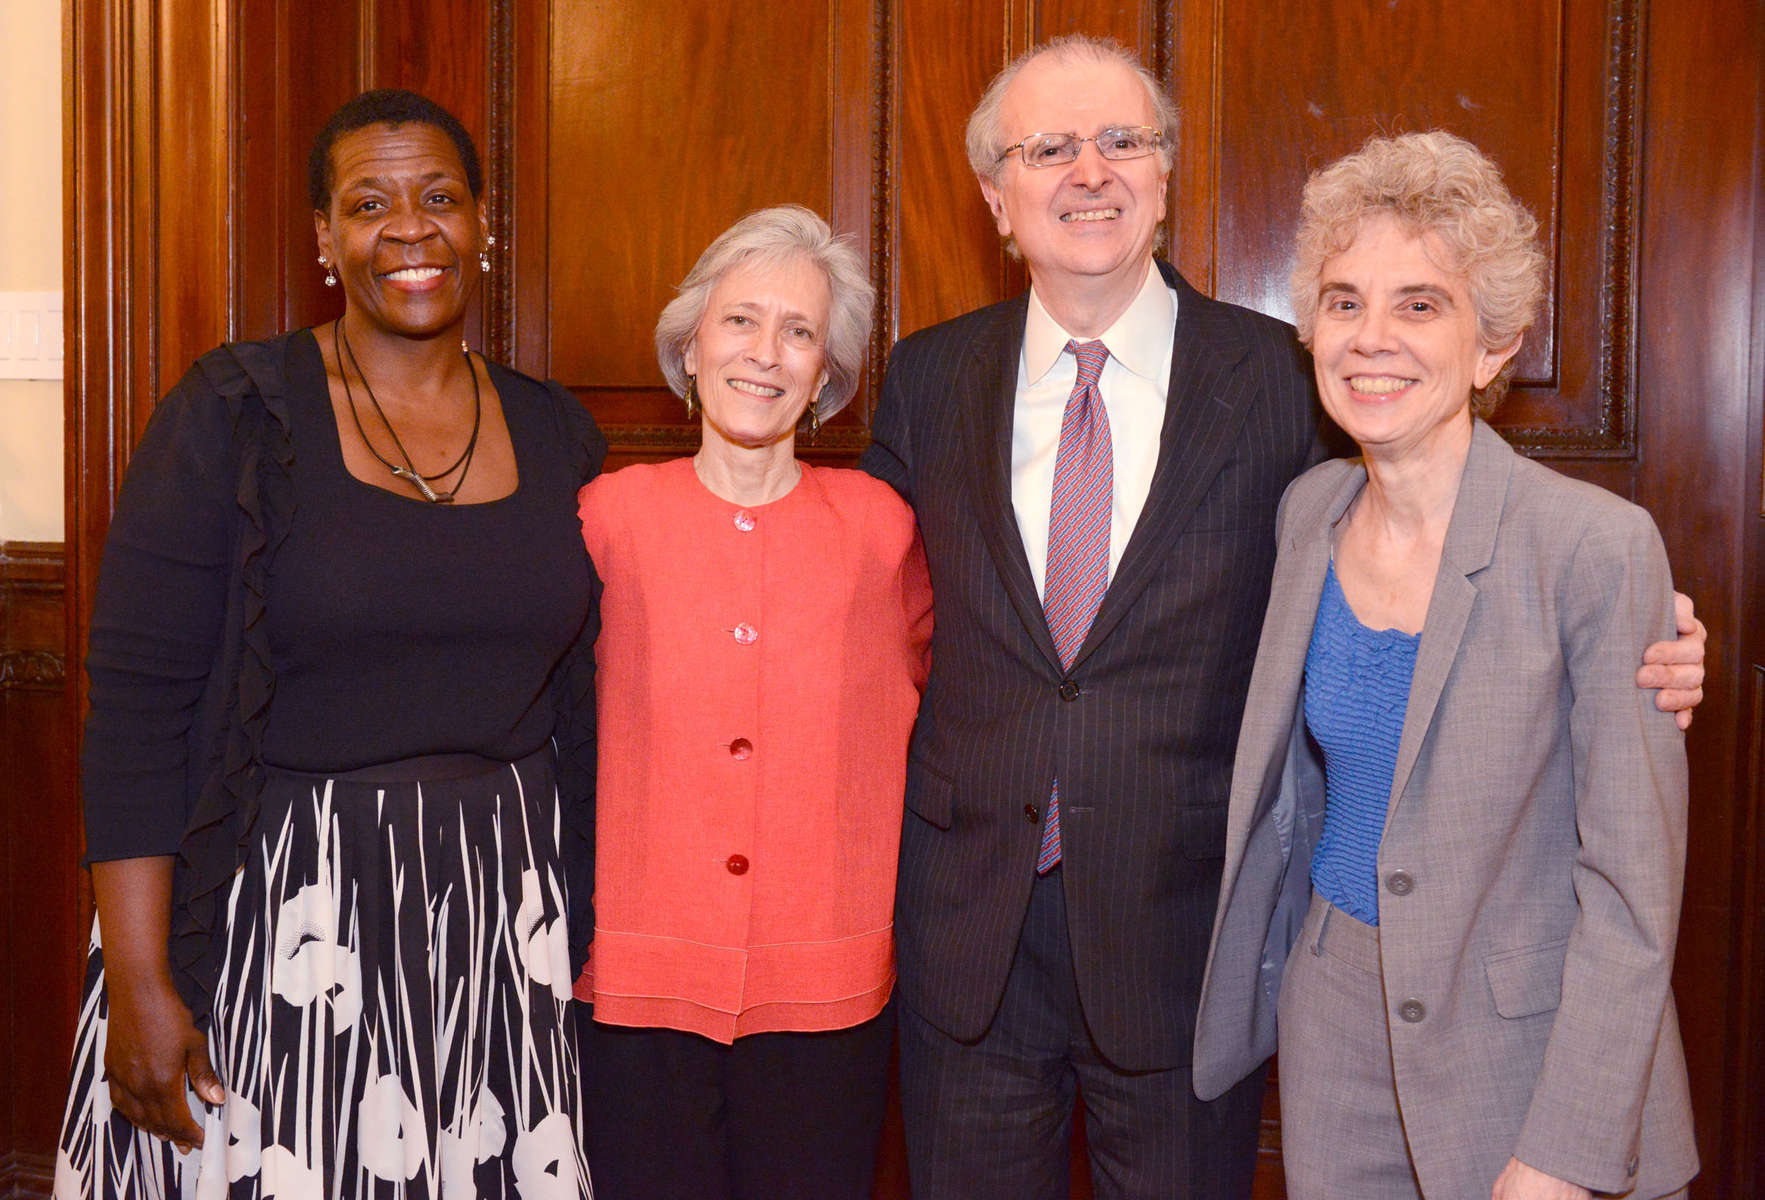 The New York City Bar Association presented the 2014 Kathryn A. McDonald Awards, which are presented annually for excellence in service to the Family Court.Recipients are, Catherine Douglass, second from left, Executive Director of Her Justice, and Alfred Siegel-former Deputy Director of the Center for Court Innovation, Mr. Siegel's award will be presented posthumously.From left are Edwina Richardson-Mendelson, Administrative Judge of the Family Courts, Ms. Douglass; Chief Judge Jonathan Lippman and City Bar President Debra Raskin.May 29, 2014